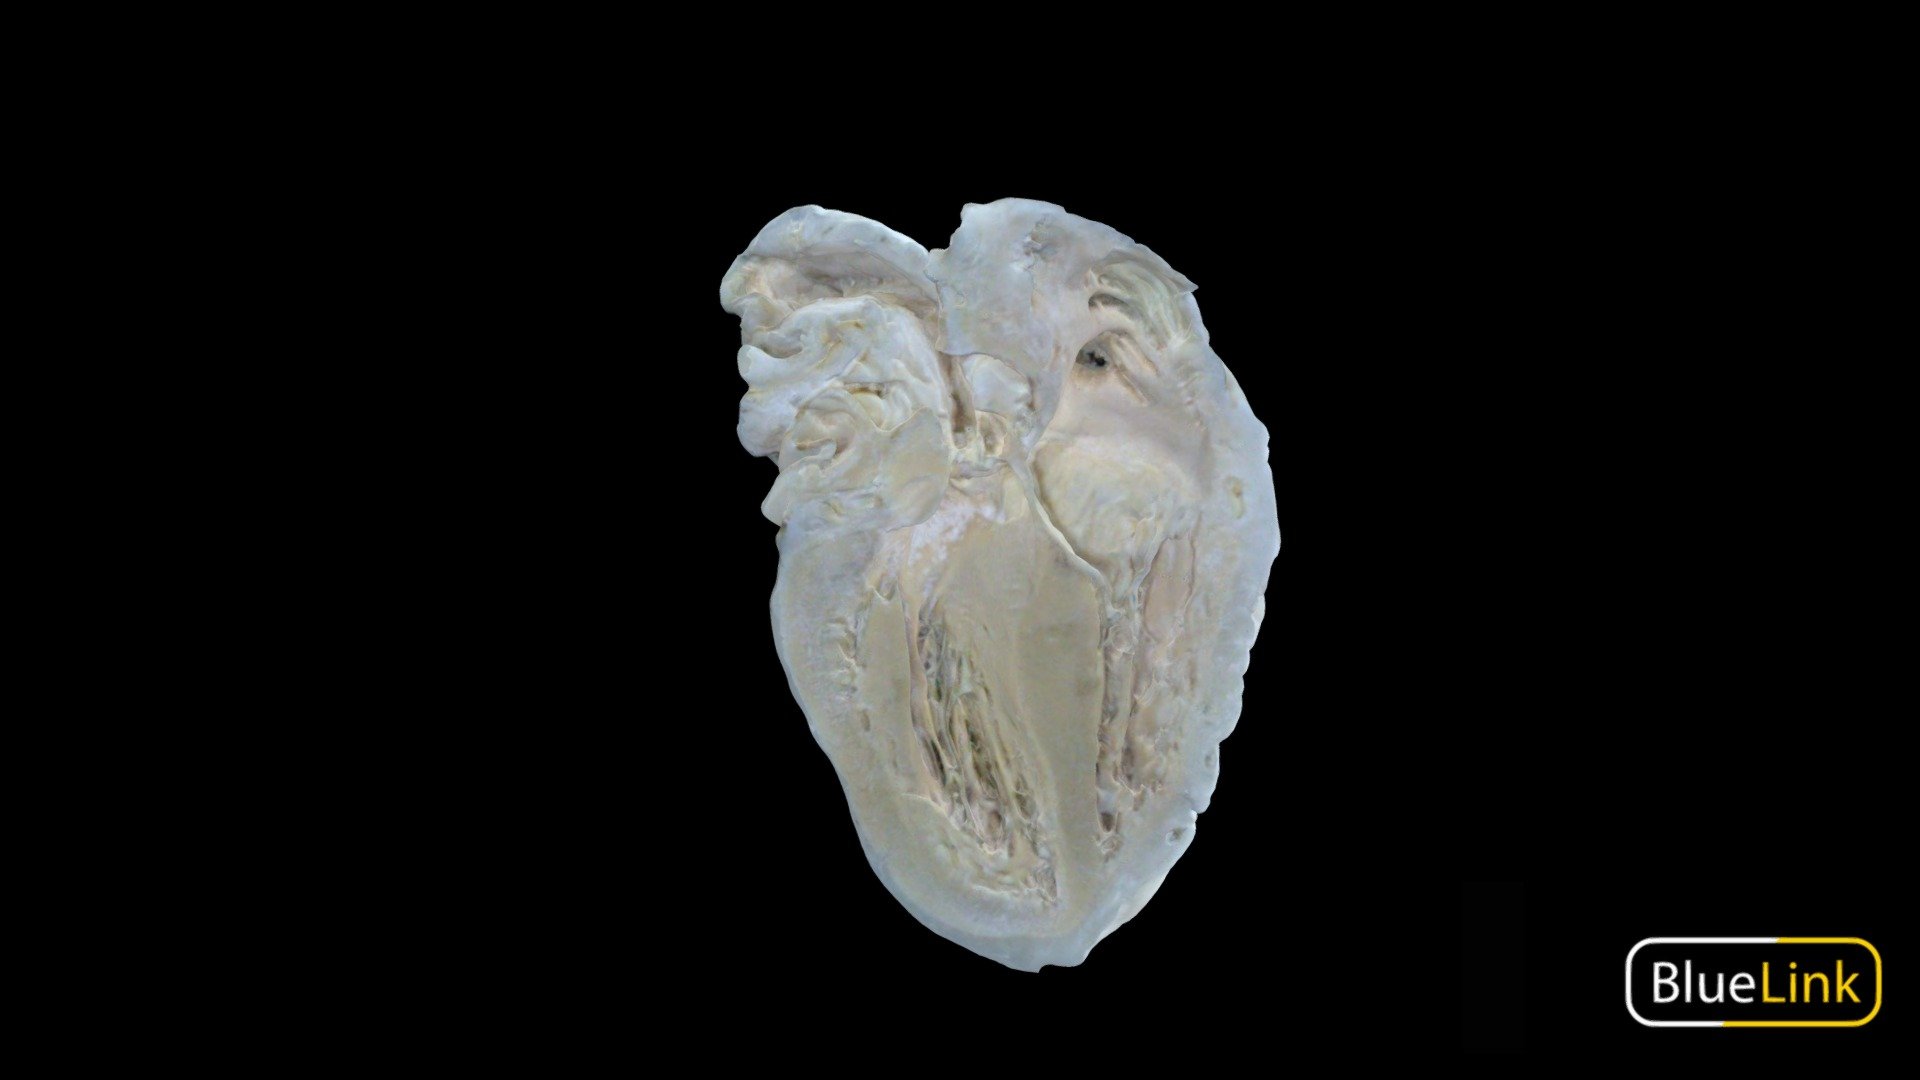 Hemisection of Human Heart 
Captured with: Einscan Pro
Captured by: Will Gribbin
Edited by: Cristina Prall
University of Michigan
91008-C01 - Atria & Ventricles - Hemisection 1 - 3D model by Bluelink Anatomy - University of Michigan (@bluelinkanatomy) 3d model